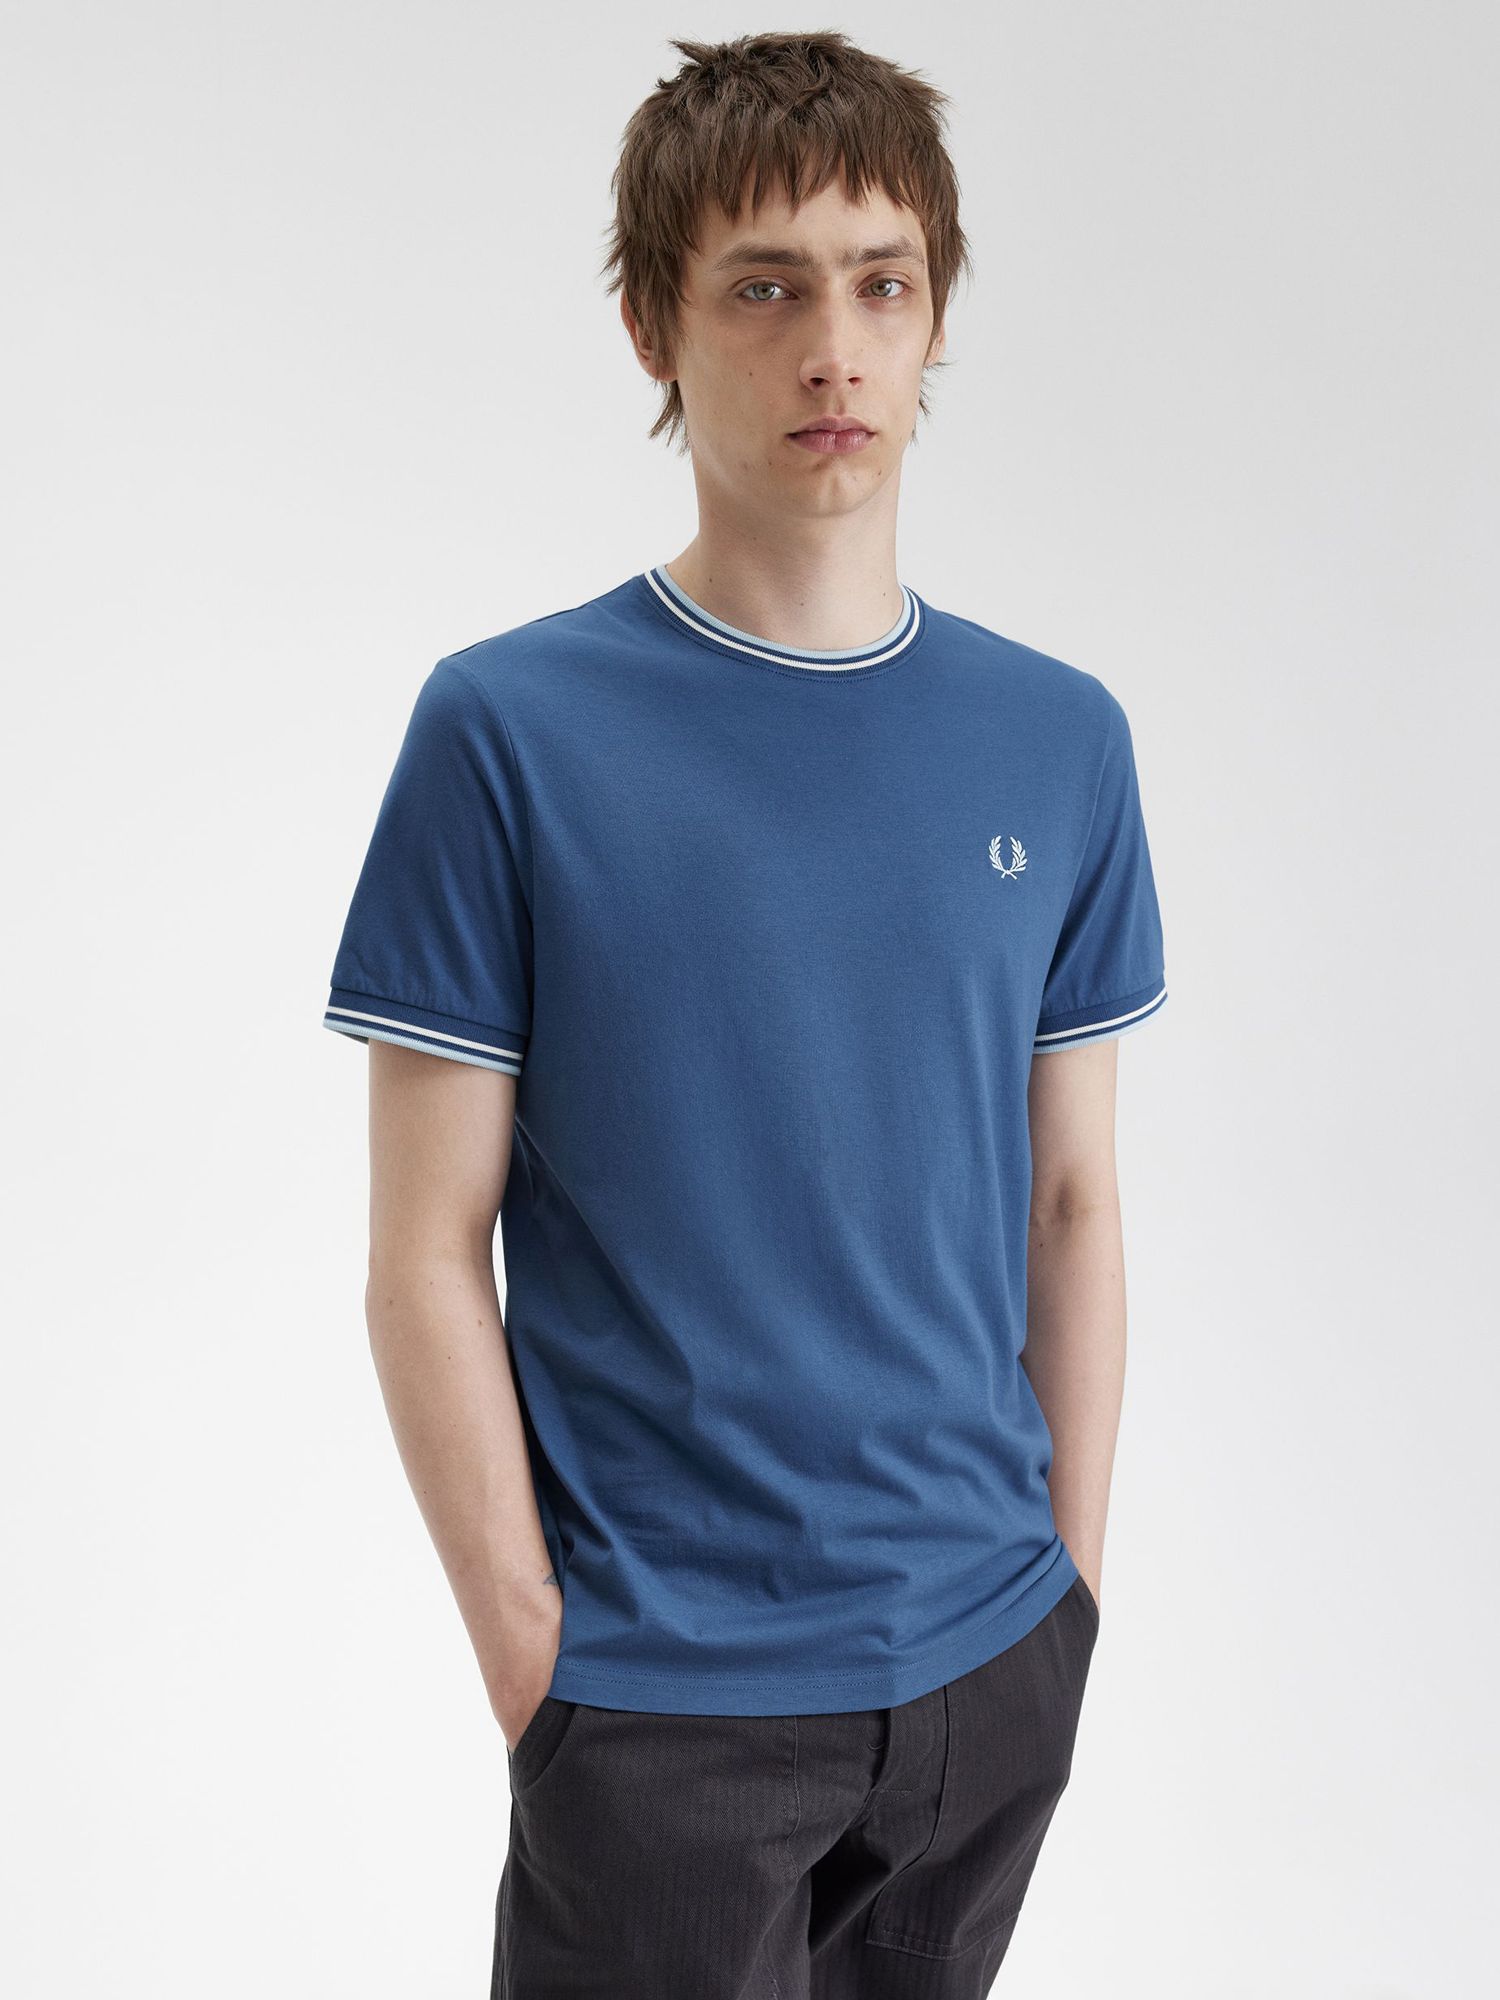 Fred Perry Twin Tipped Crew Neck T-Shirt, Blue, S